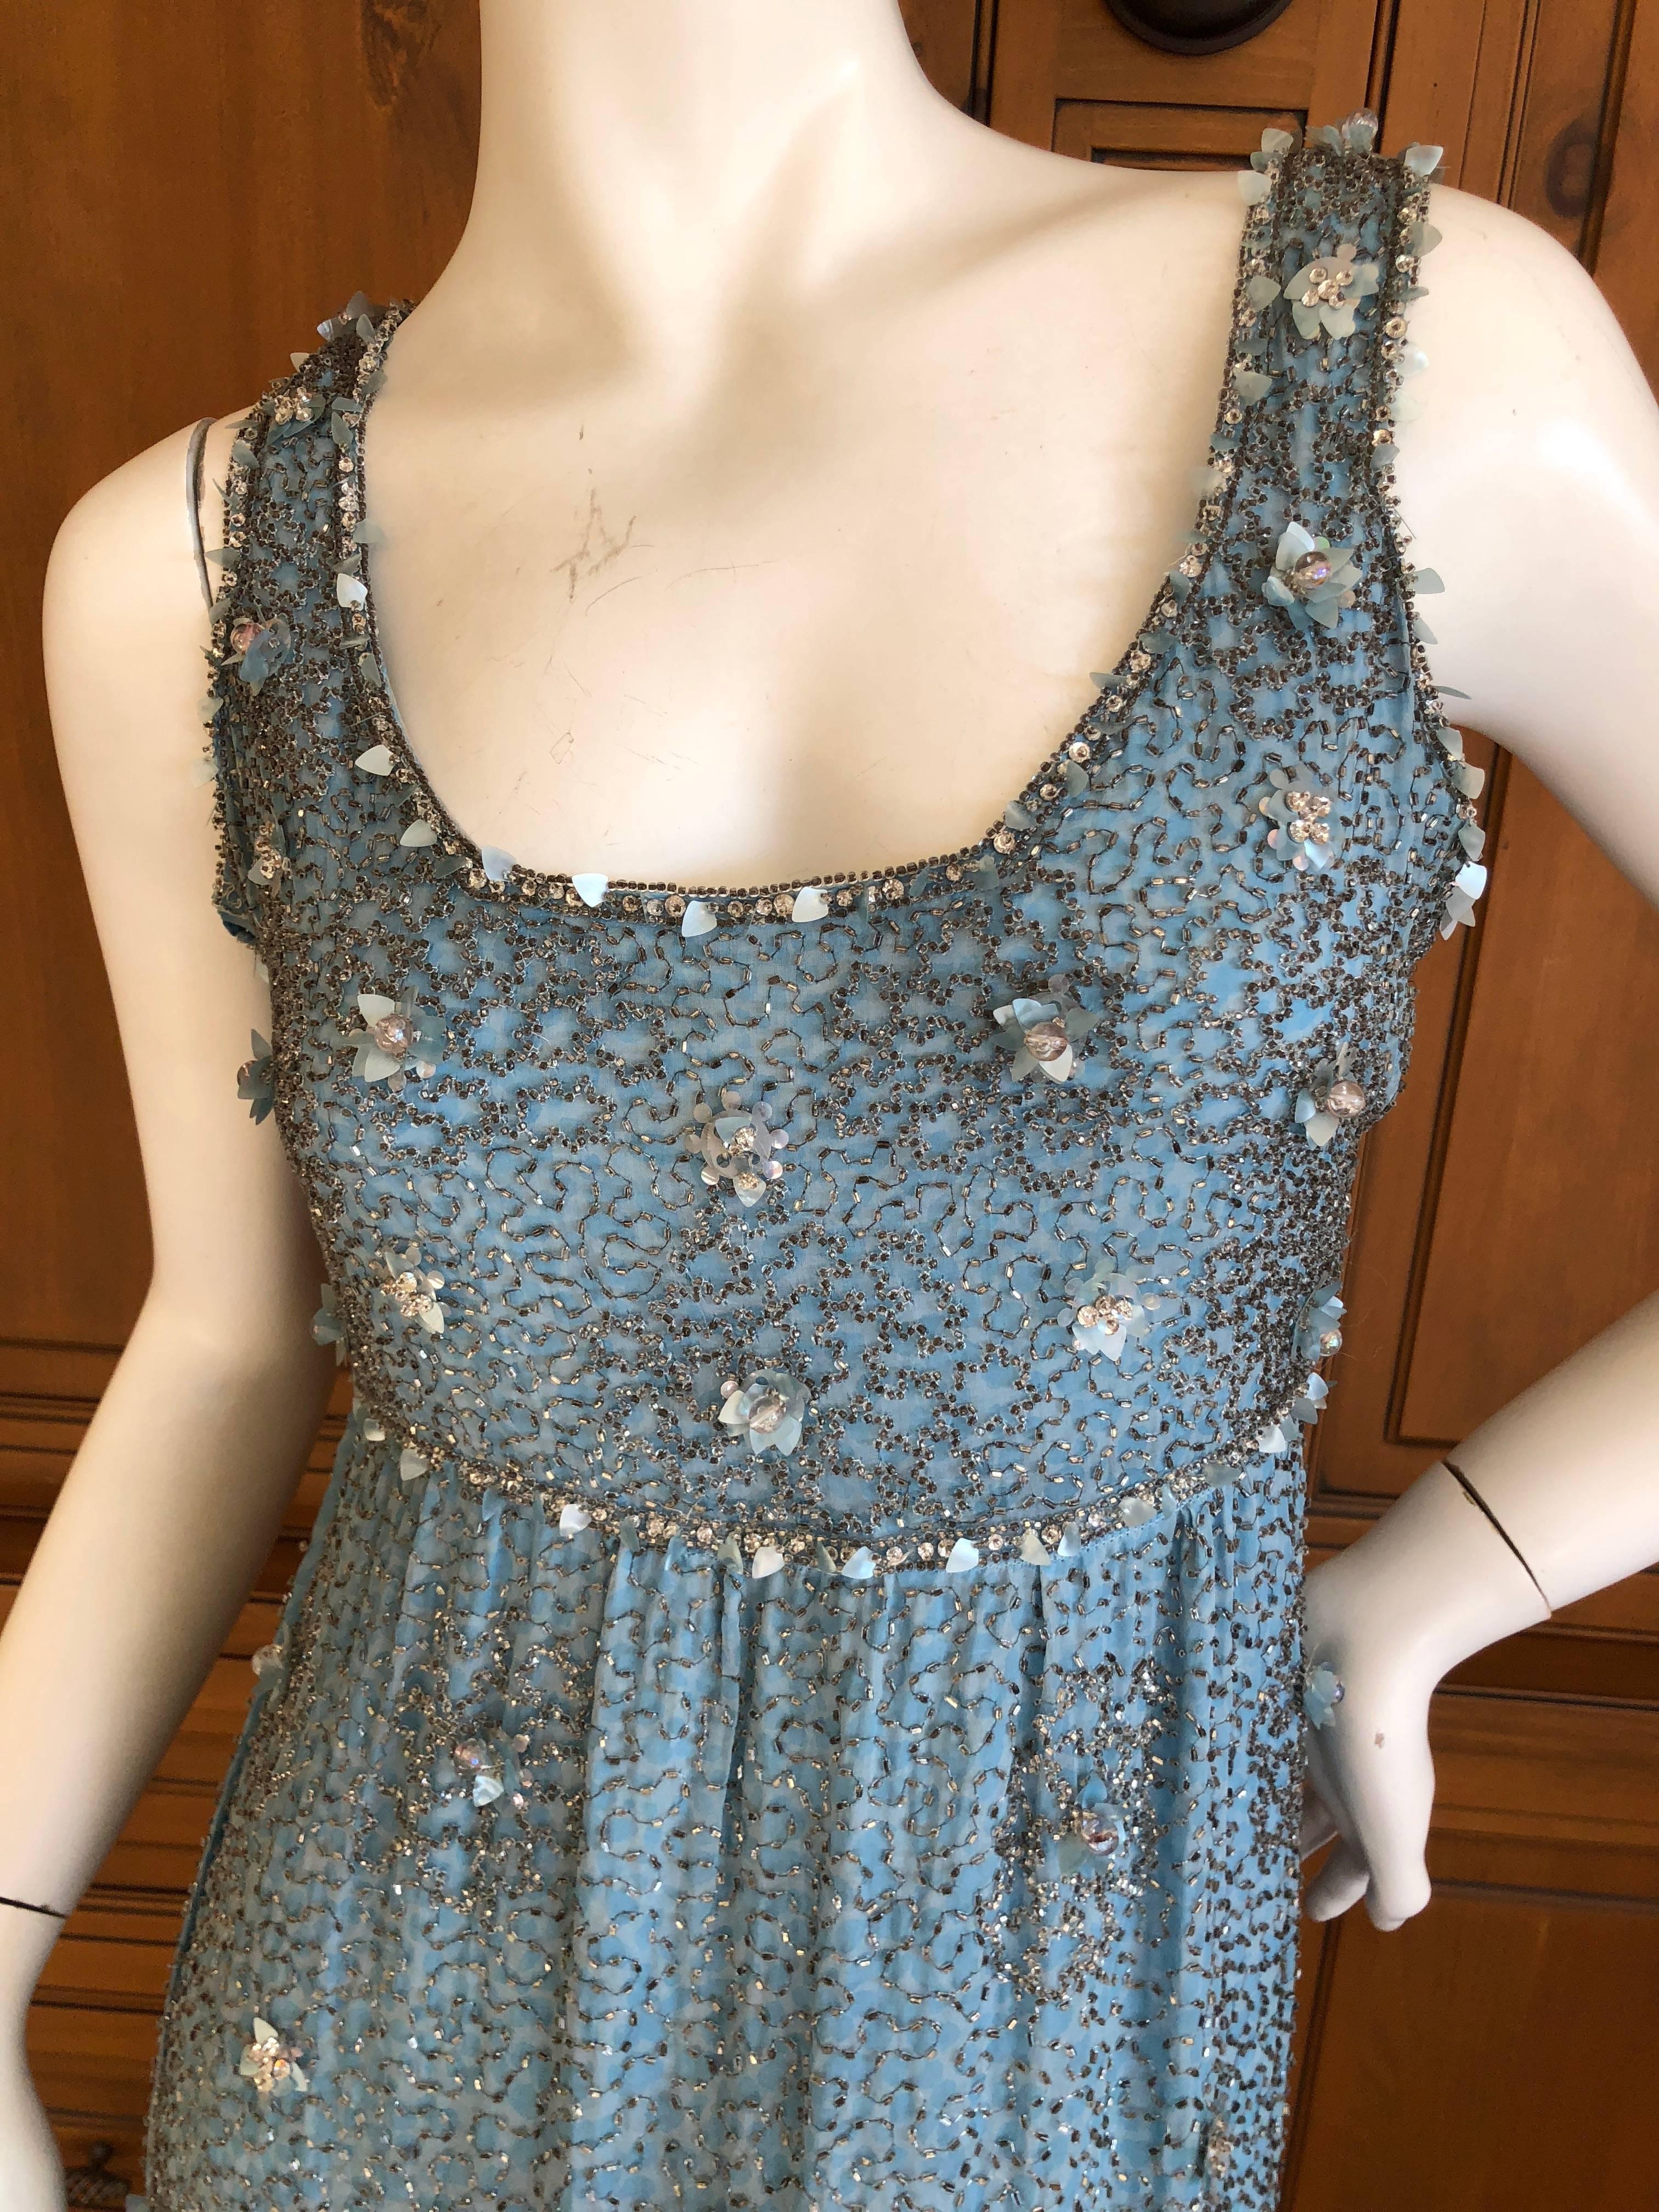 Christian Dior Haute Couture 1968 Bead Embellished Empire Style Evening Dress.
This is amazing, the beadwork has crystals and sequin flowers  by Maison Lesage.
Bust 40"
Waist 32"
Hips 40"
Length 59"
Great pre owned condition,